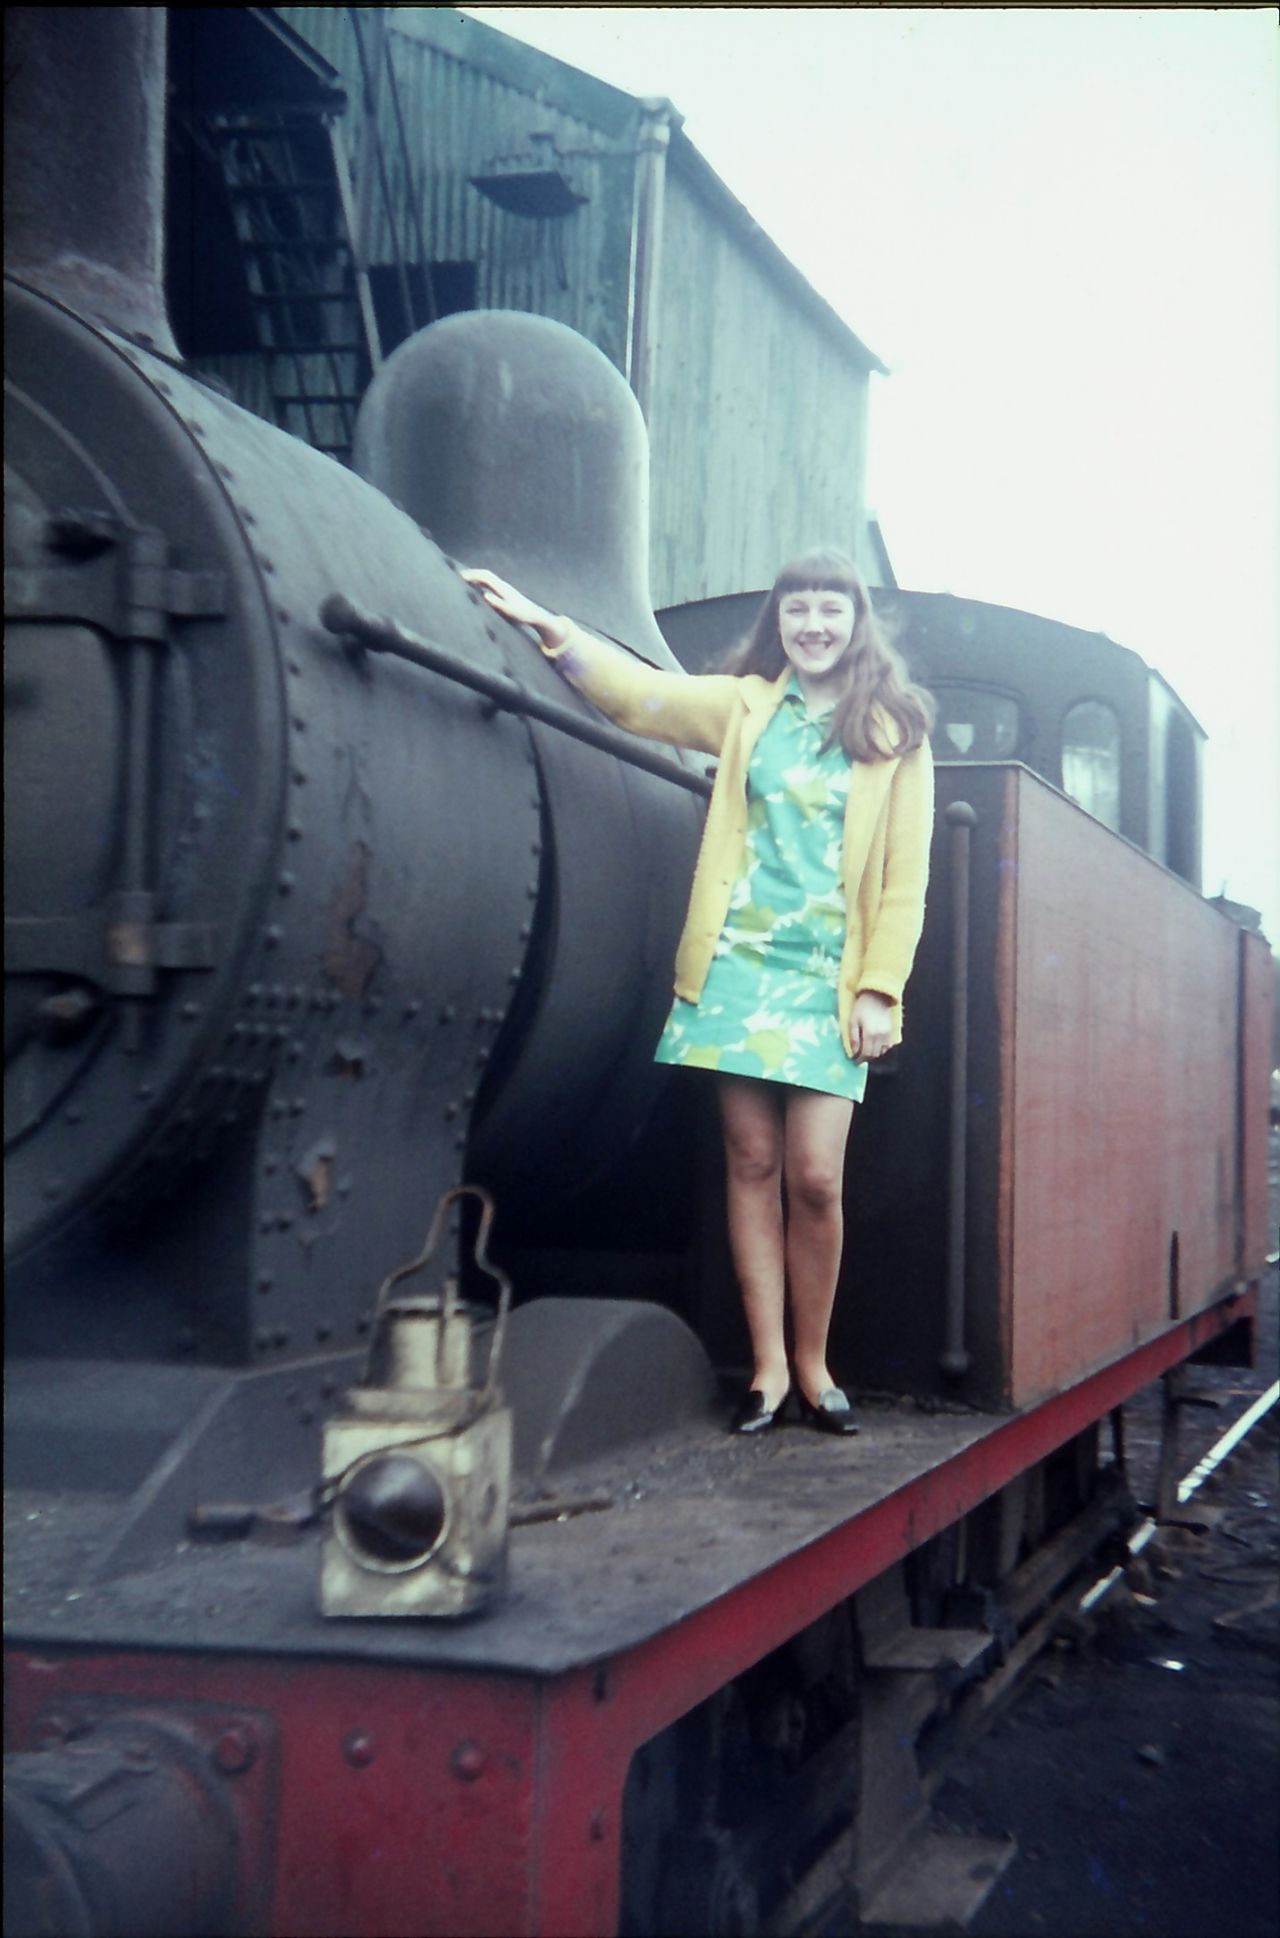 <a href="http://ireport.cnn.com/docs/DOC-948800">Keith Long</a> took this picture of his wife in 1969 on the running board of a steam engine in England. "Sixties fashion was a changing decade -- very dated in the early part and trendy and totally different at the end," Long says.